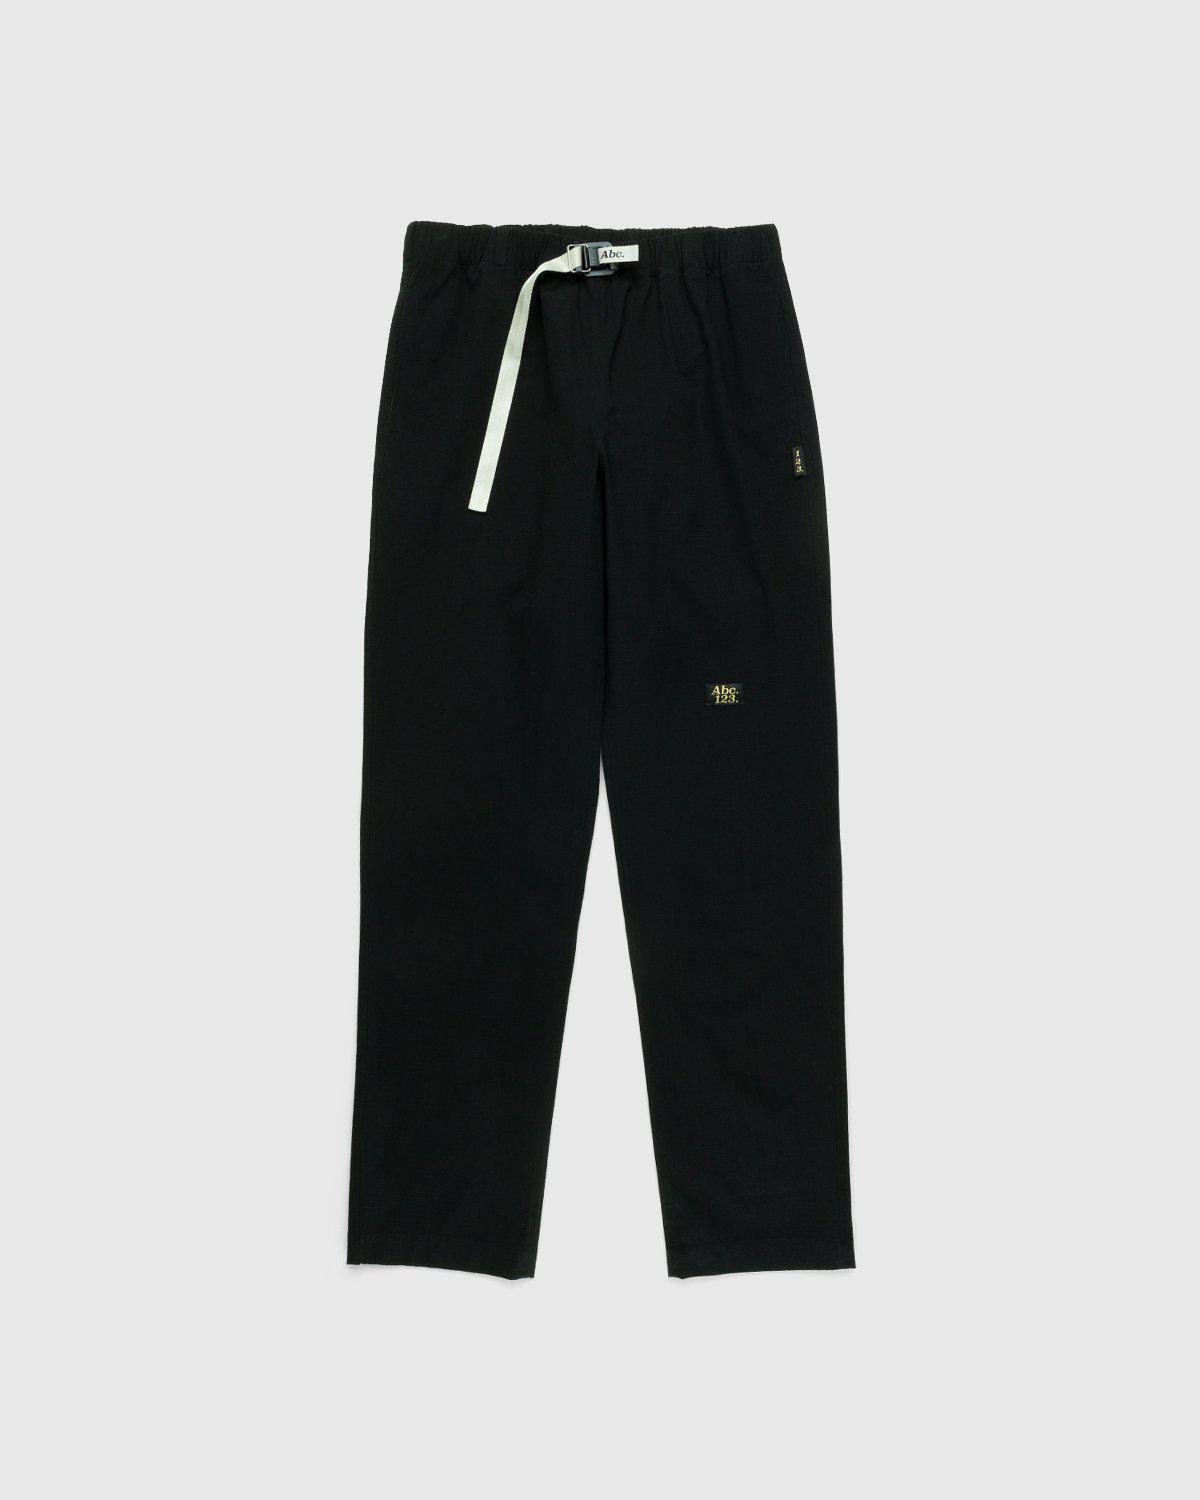 Studio Work Pant Anthracite by ABC.